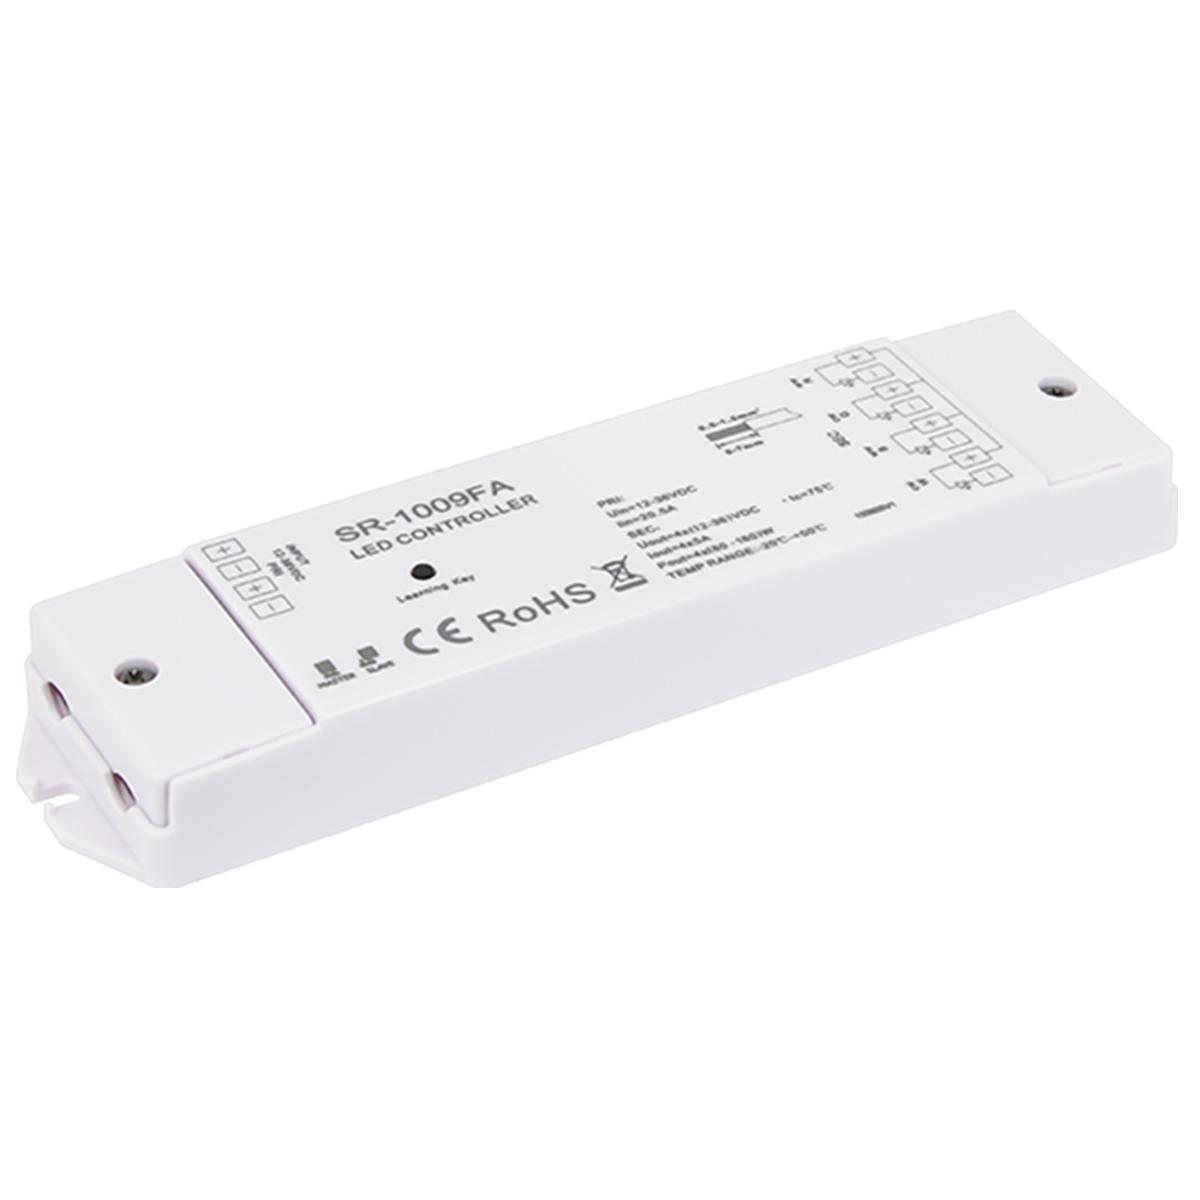 Trulux RF Receiver, 4 Channels x 5A, 12-36V DC Constant Voltage